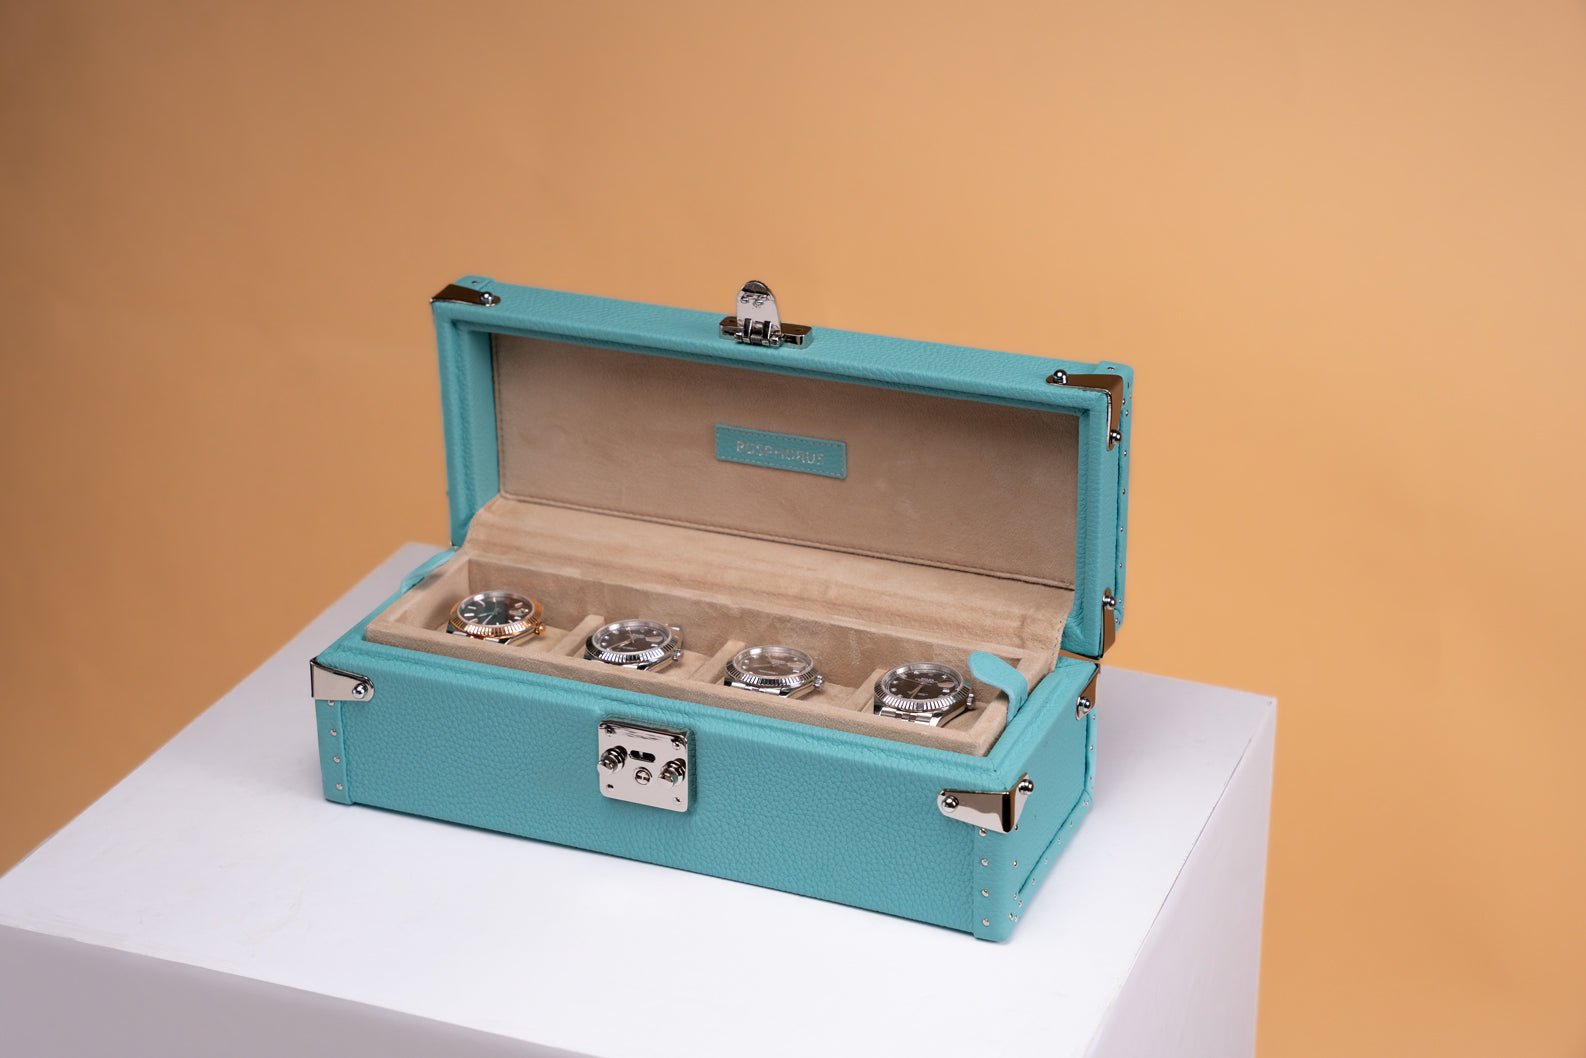 Bosphorus LeatherPetra Watch Case - Togo Tiffany Blue For 4 Watches